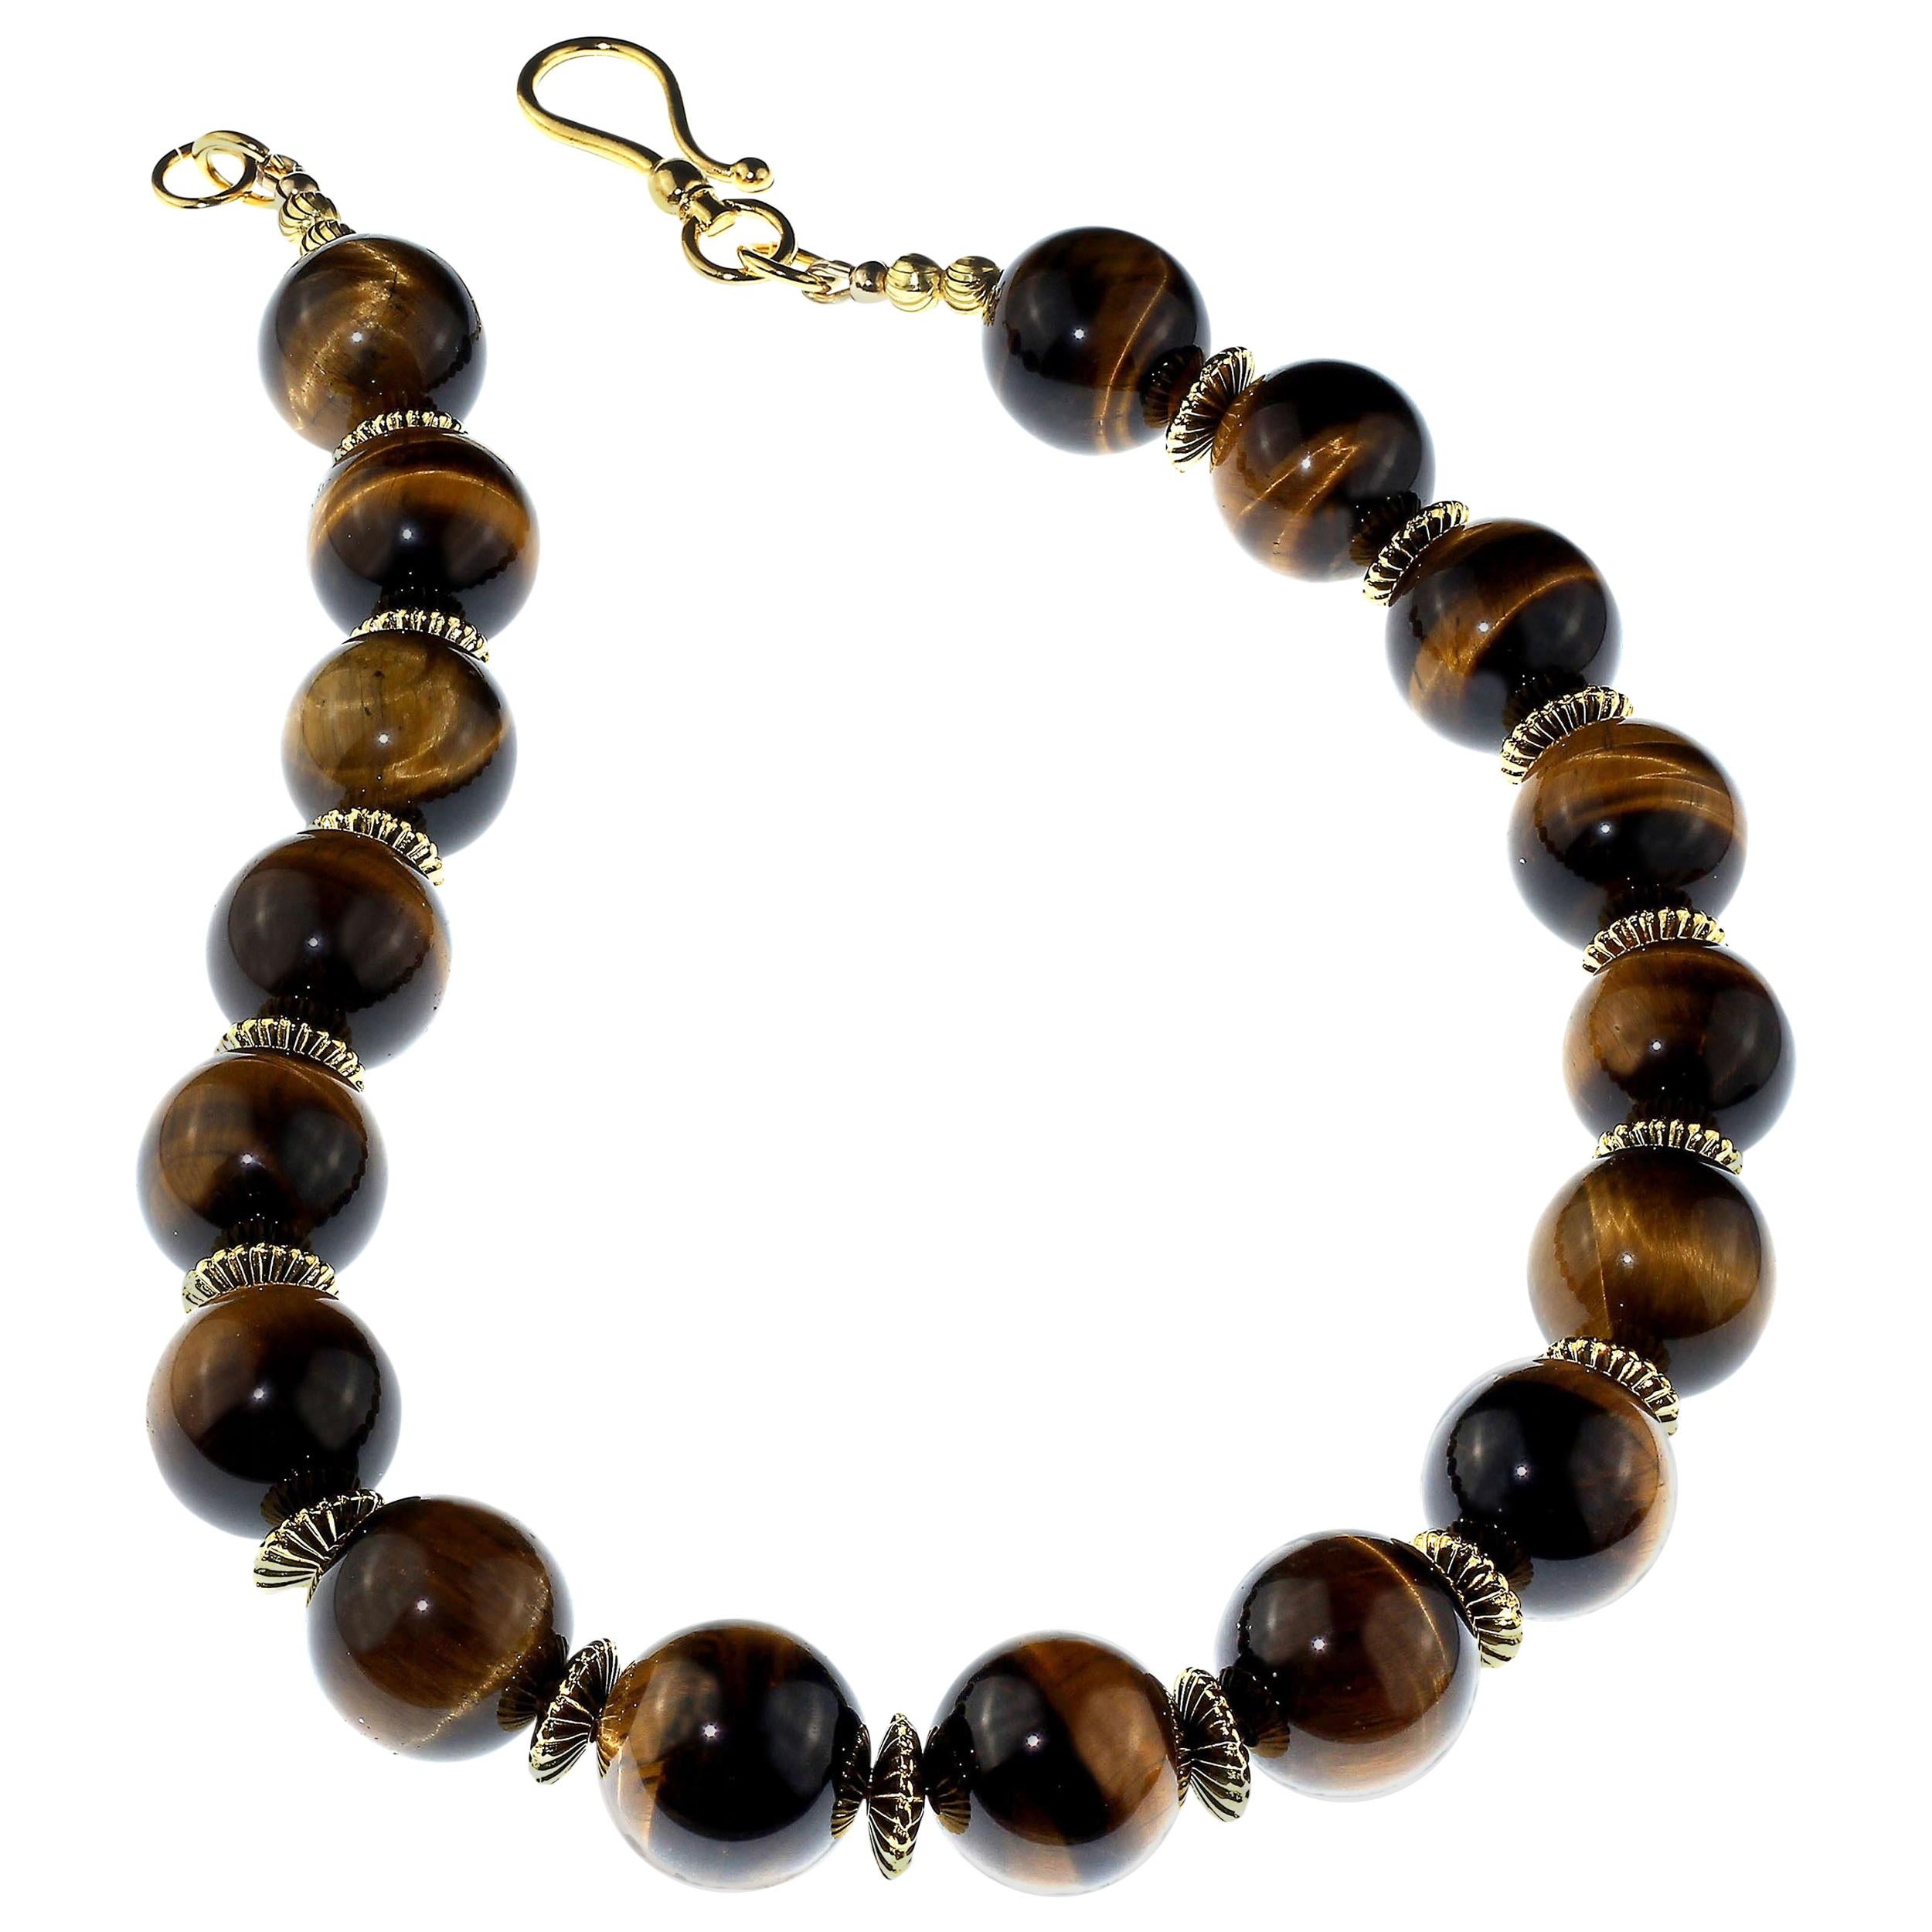 This is 19 inches of gorgeous Tiger's Eye necklace! This unique glowing 20 MM Tiger's Eye is enhanced with corrugated gold tone rondelles and a 24K gold Duro plate hook and eye clasp. This large hook and eye clasp makes it so easy to slip this one